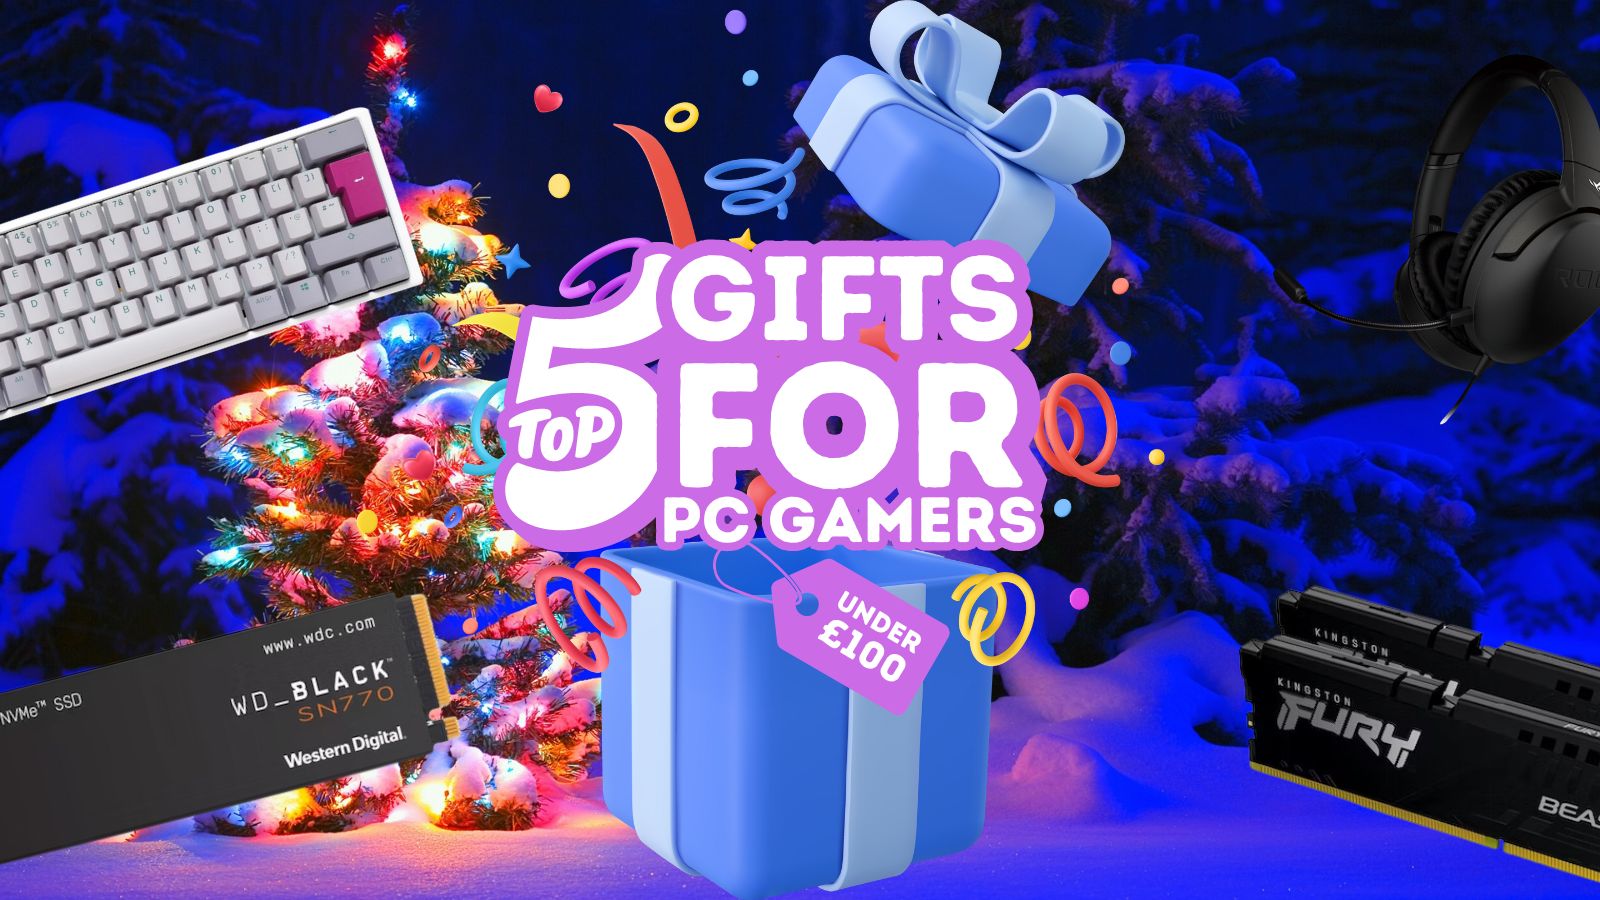 Top 5 Gifts for PC Gamers Under £100